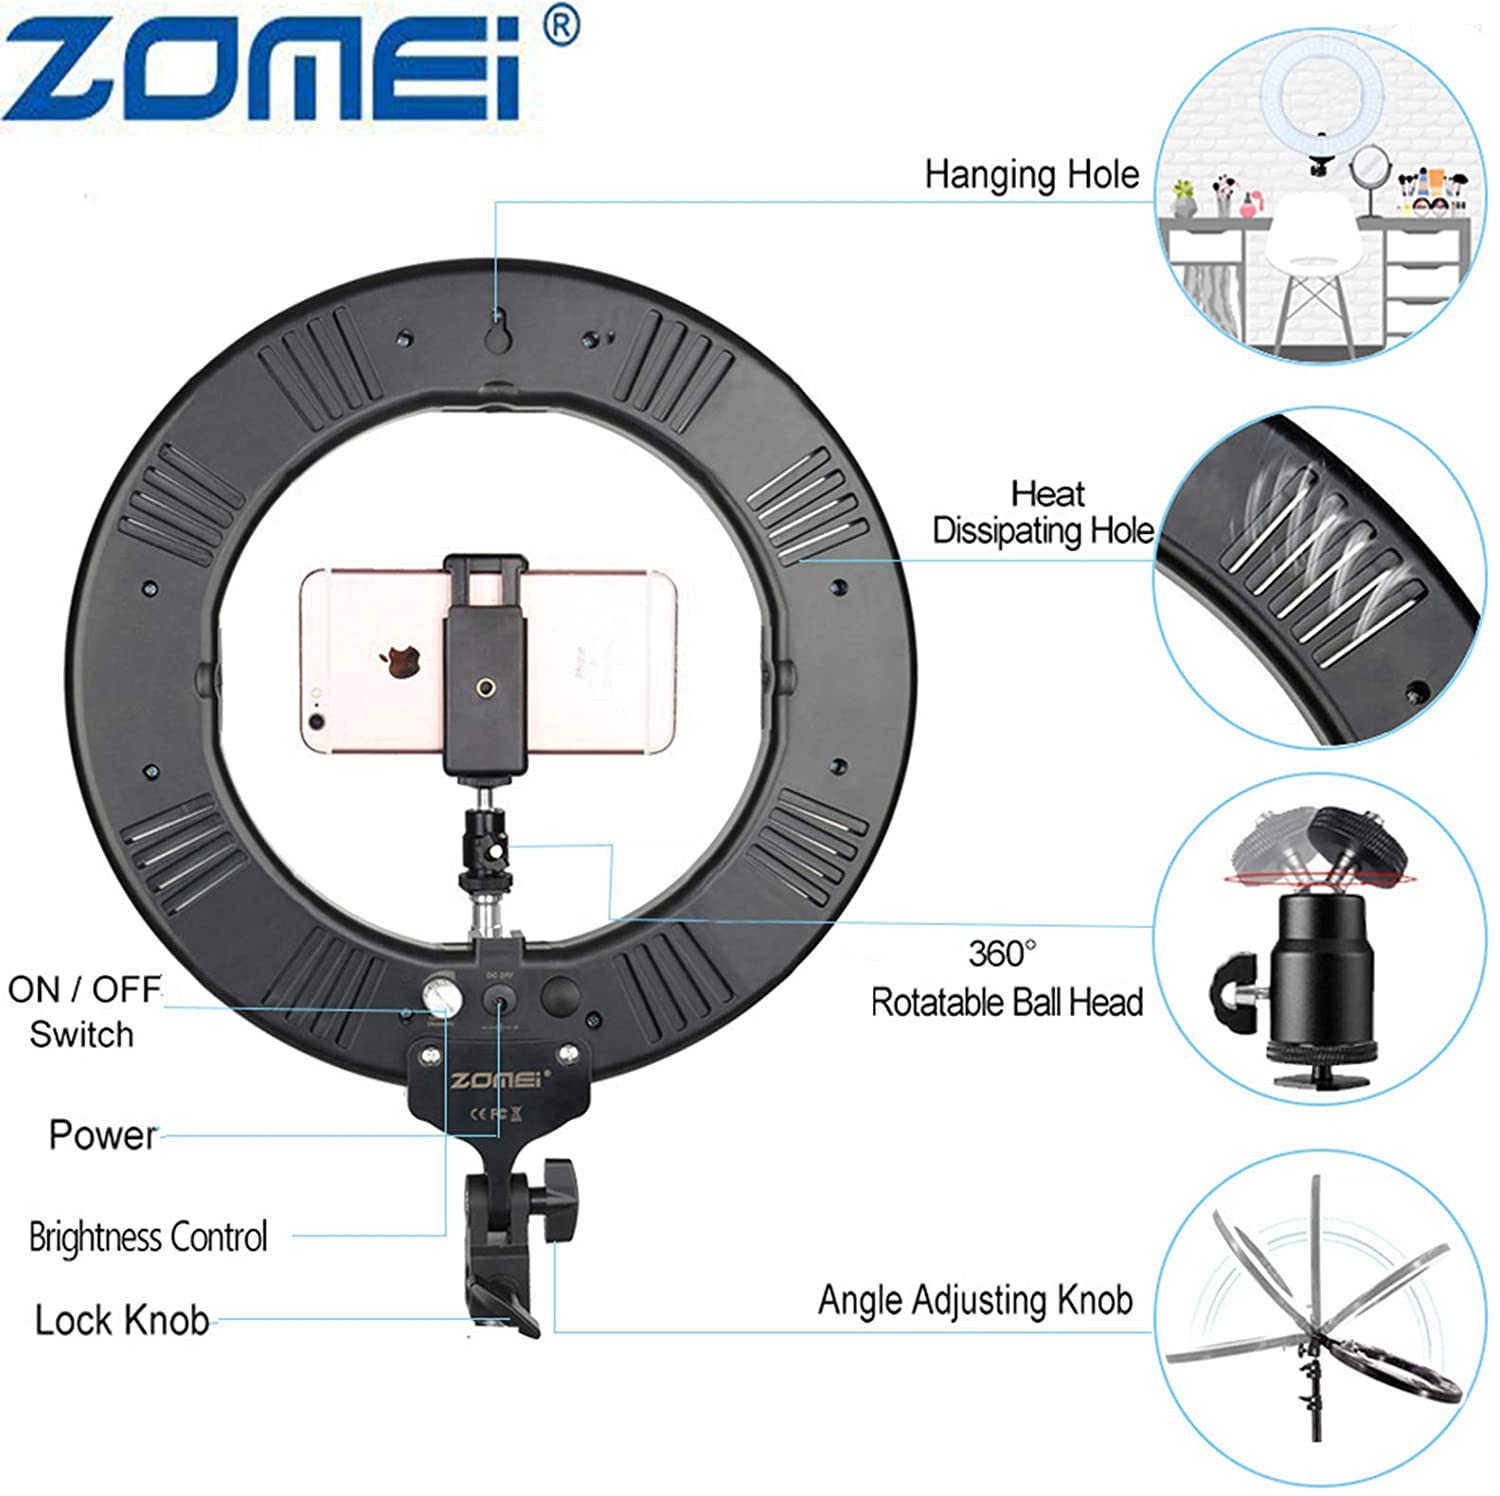 ZOMEI 14 inch LED Ring Light, Dimmable 41W 5500k Output Makeup and YouTube Video Light Professional Photography Lights with Stand, Orange Plastic Filters and Carrying Bag